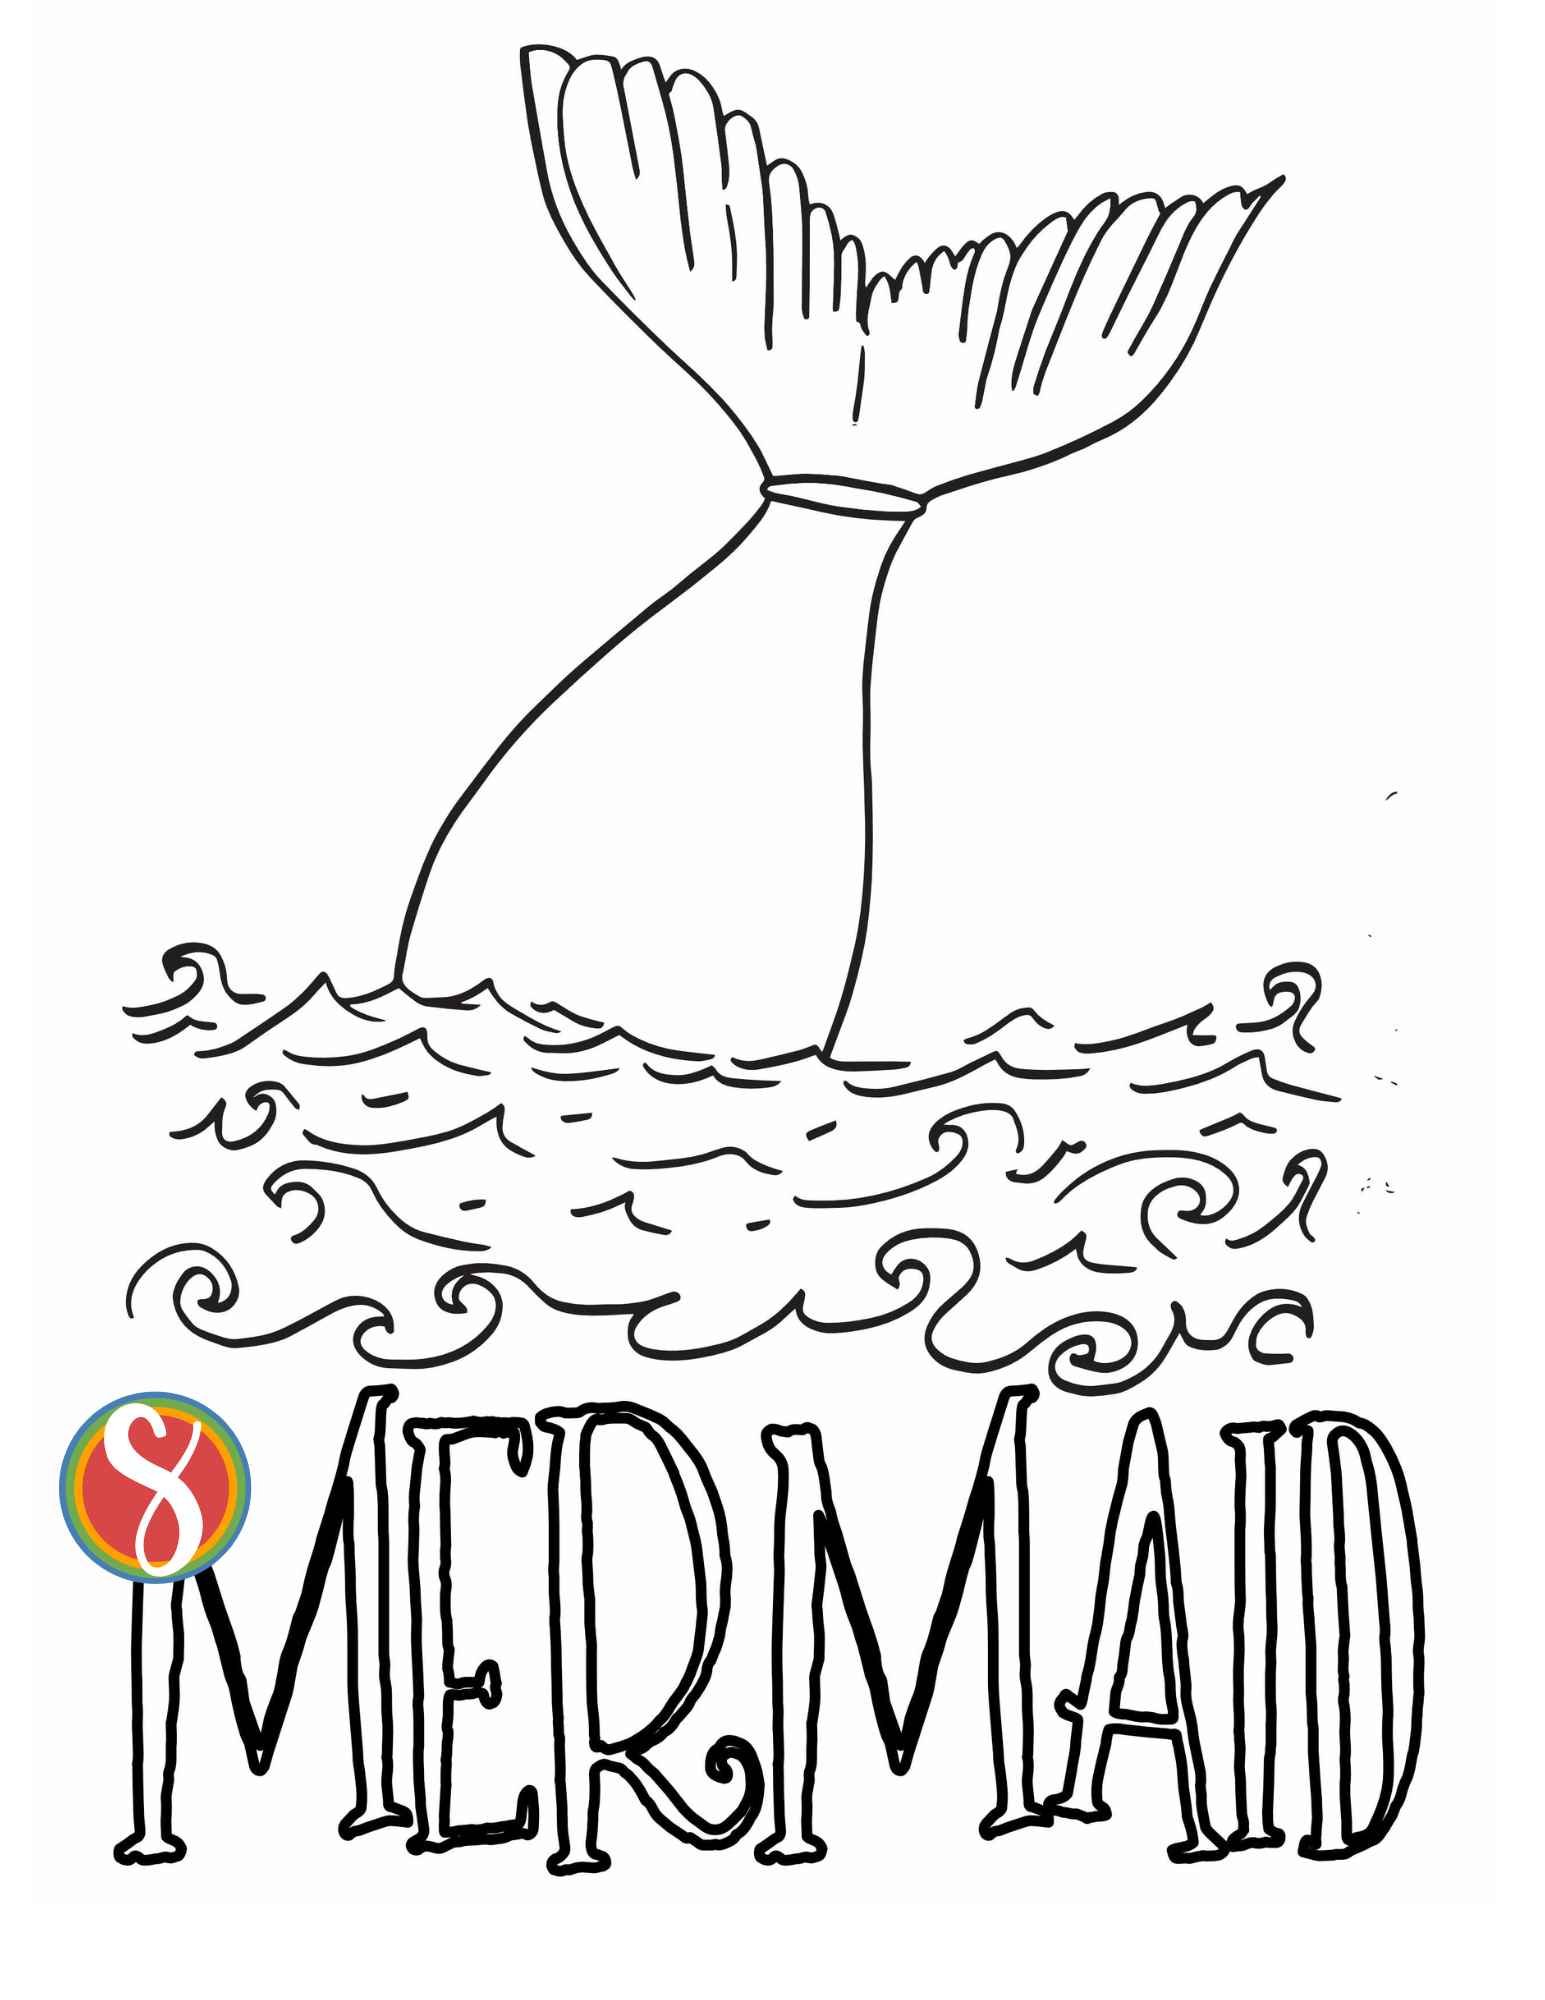 A simple outline of a large mermaid tail coming out of thin waves, also outlines with the colorable word "mermaid" underneath the tail image